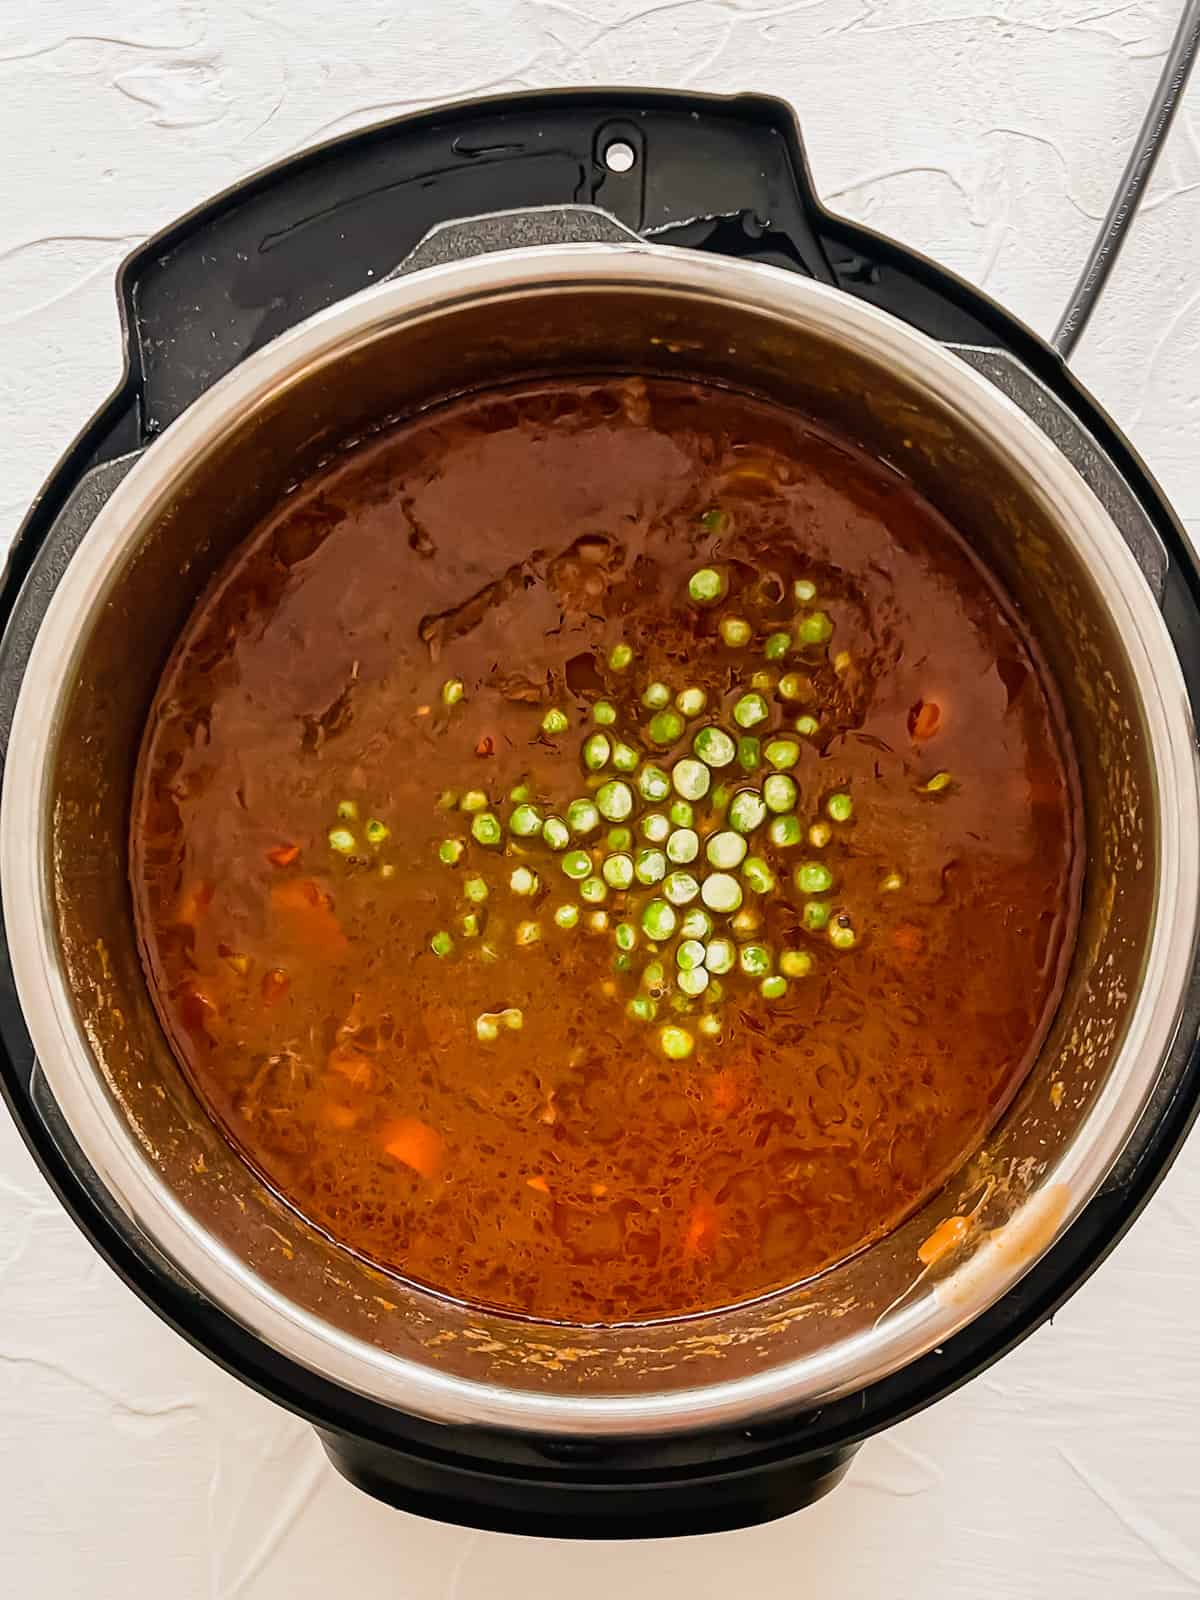 Frozen peas being added to beef stew in an Instant Pot.